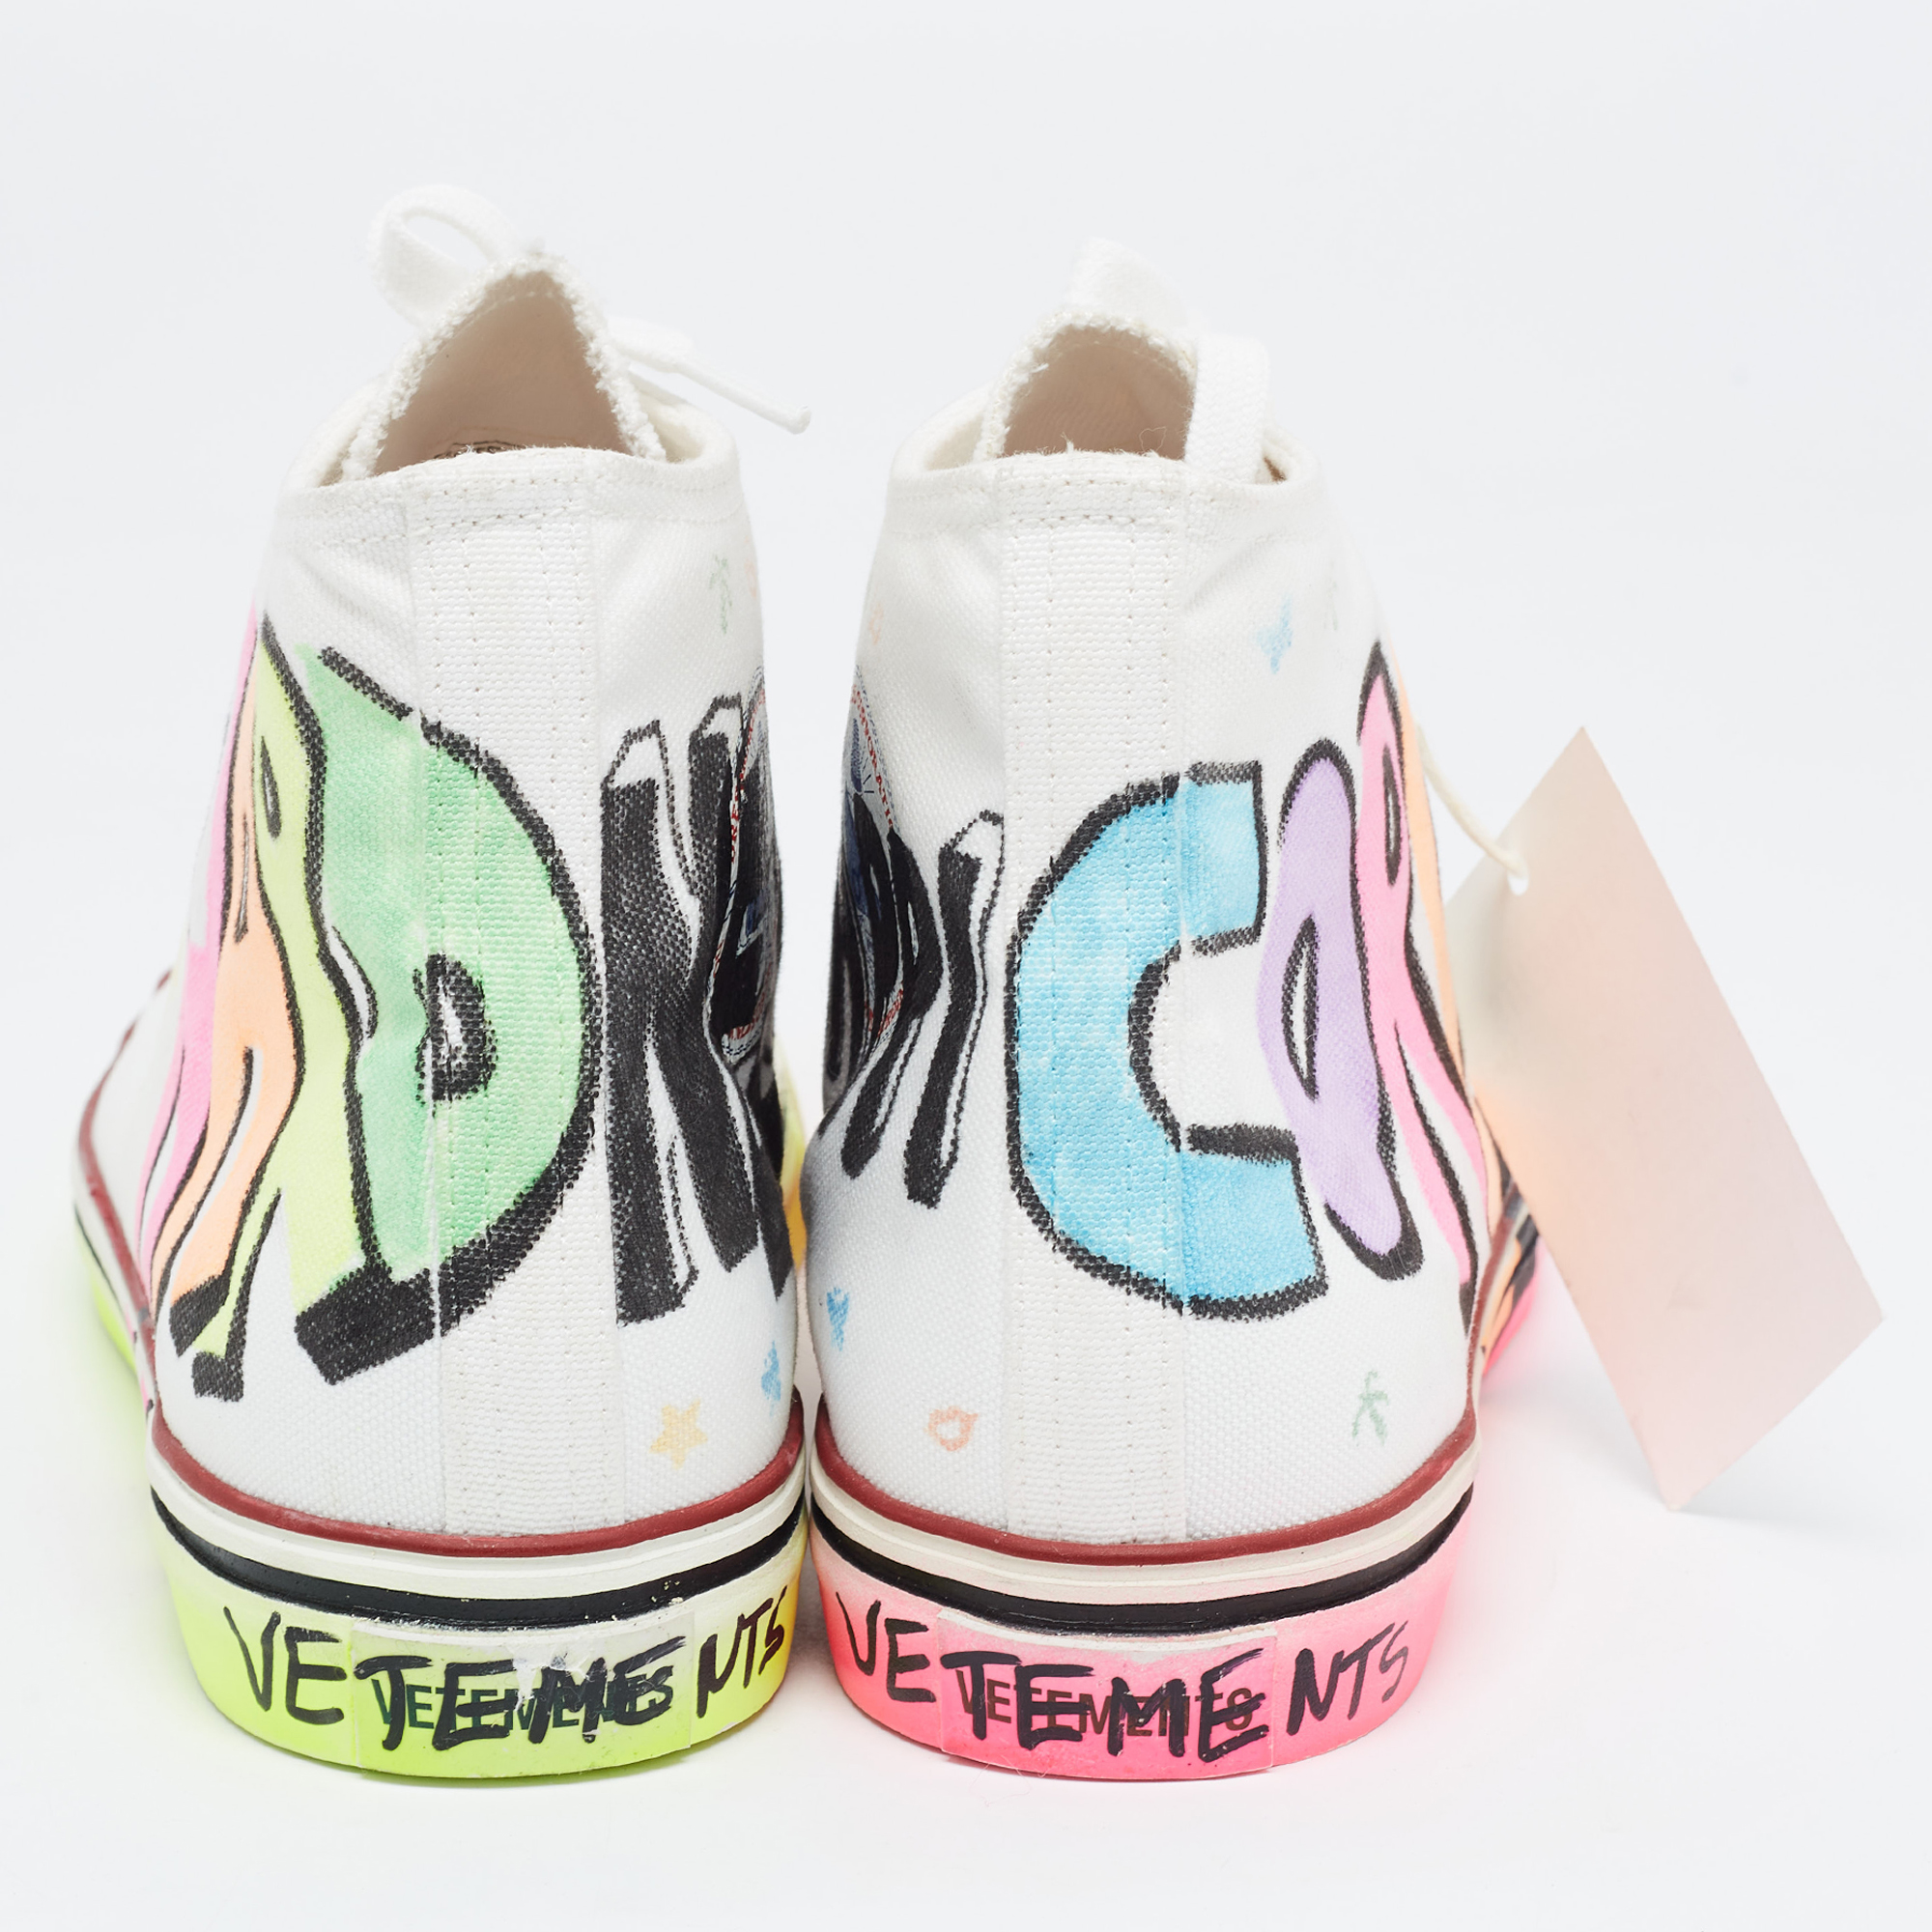 Vetements White Canvas Printed Hard Core Happiness High Top Sneakers Size 41